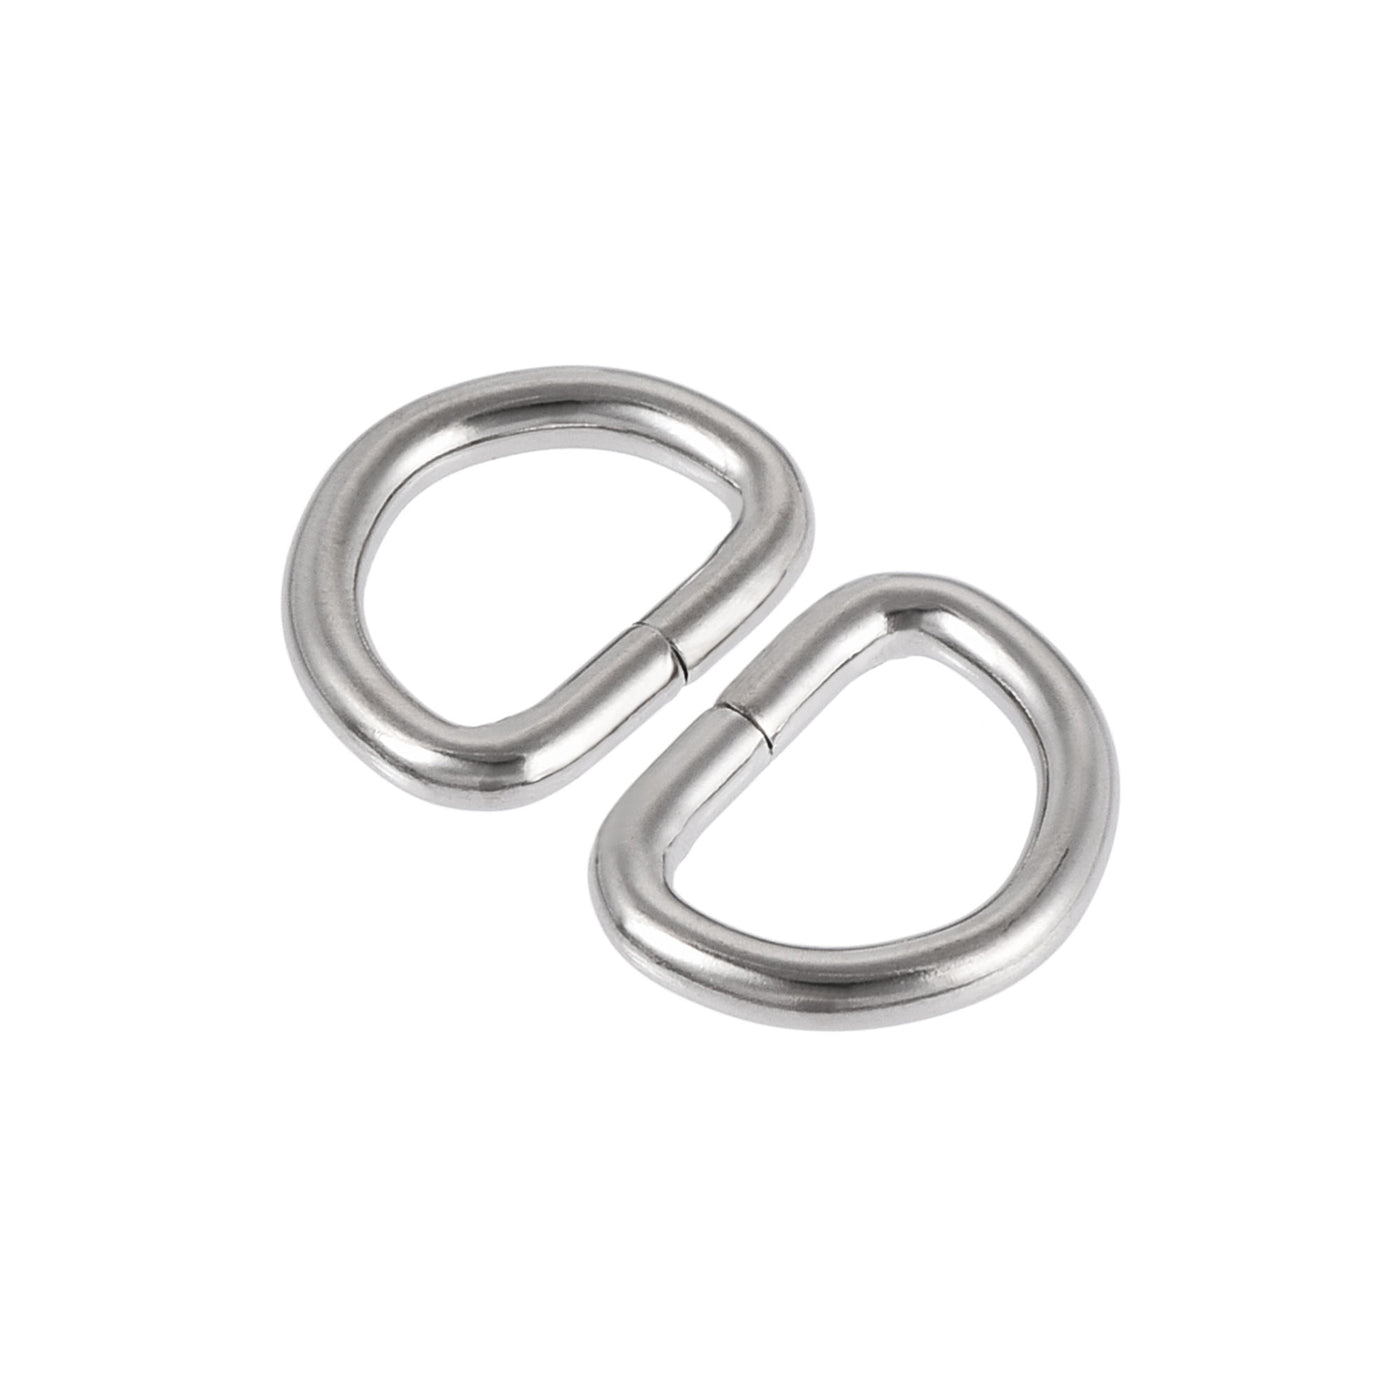 uxcell Uxcell Metal D Ring 0.51"(13mm) D-Rings Buckle for Hardware Bags Belts Craft DIY Accessories Silver Tone 100pcs